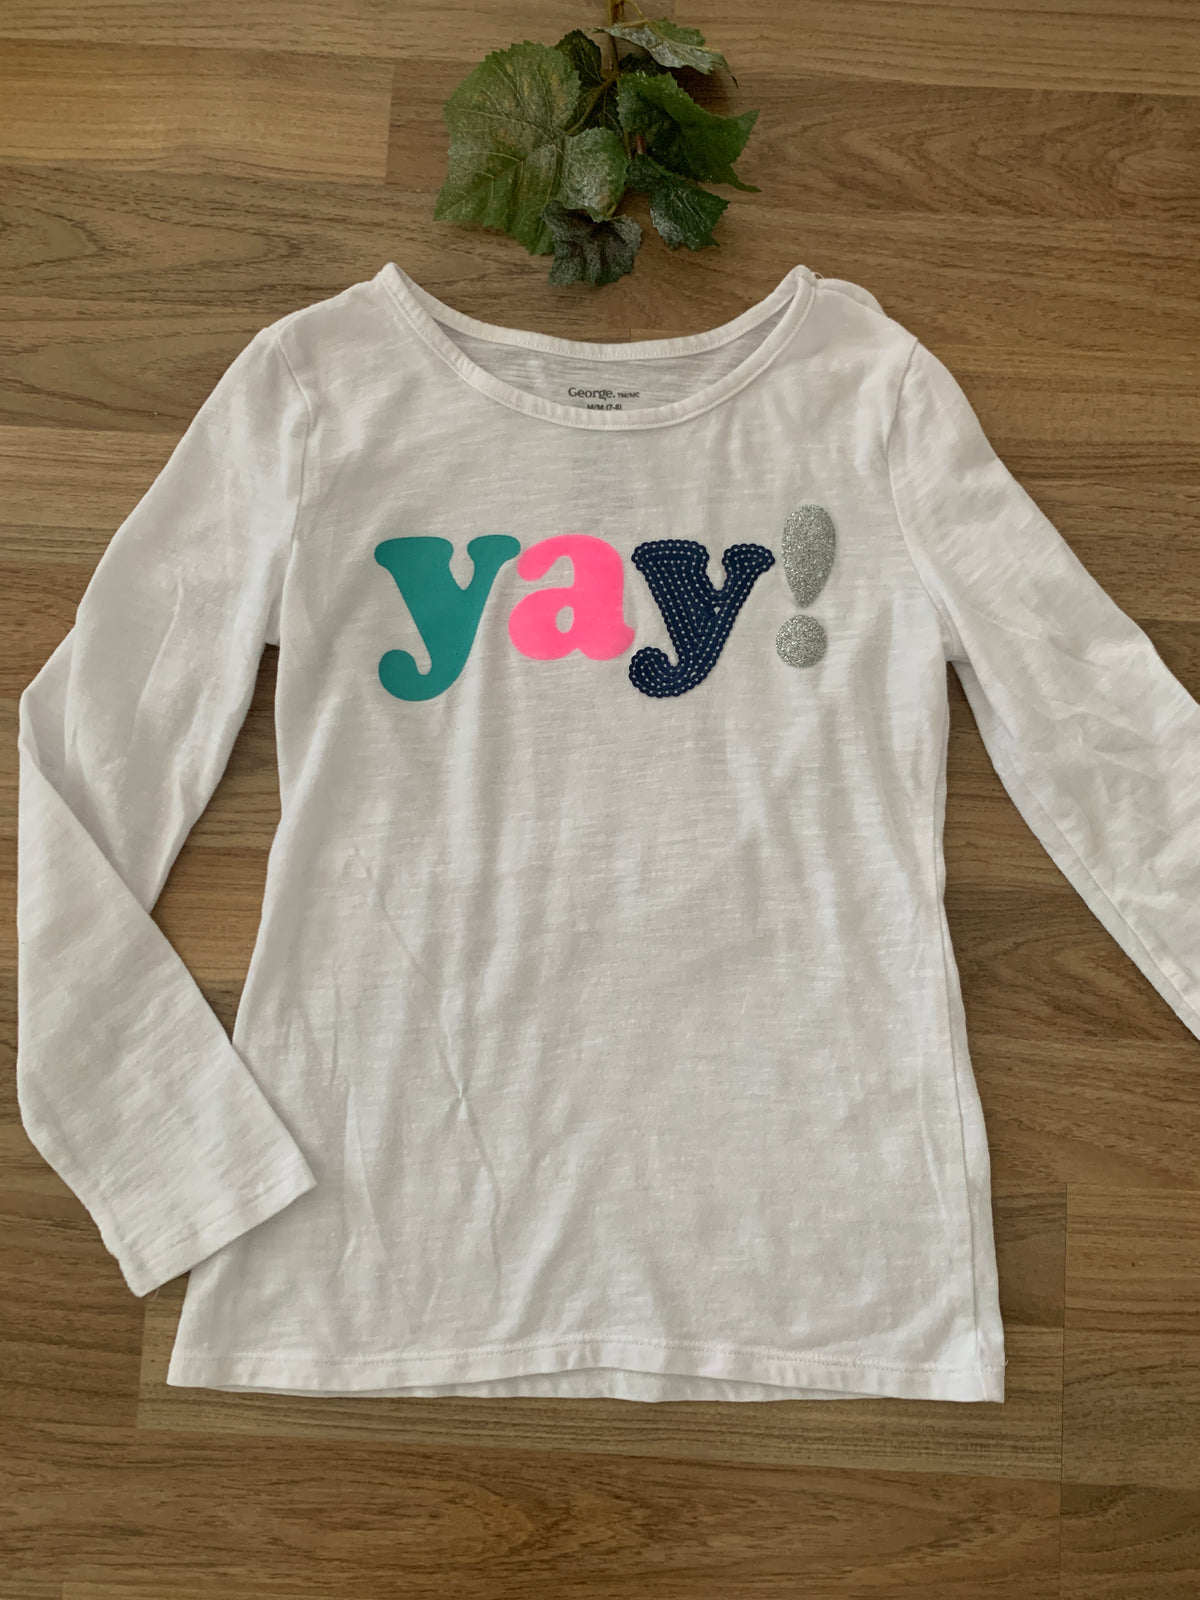 Long Sleeve Graphic Top (Girls Size 7-8)